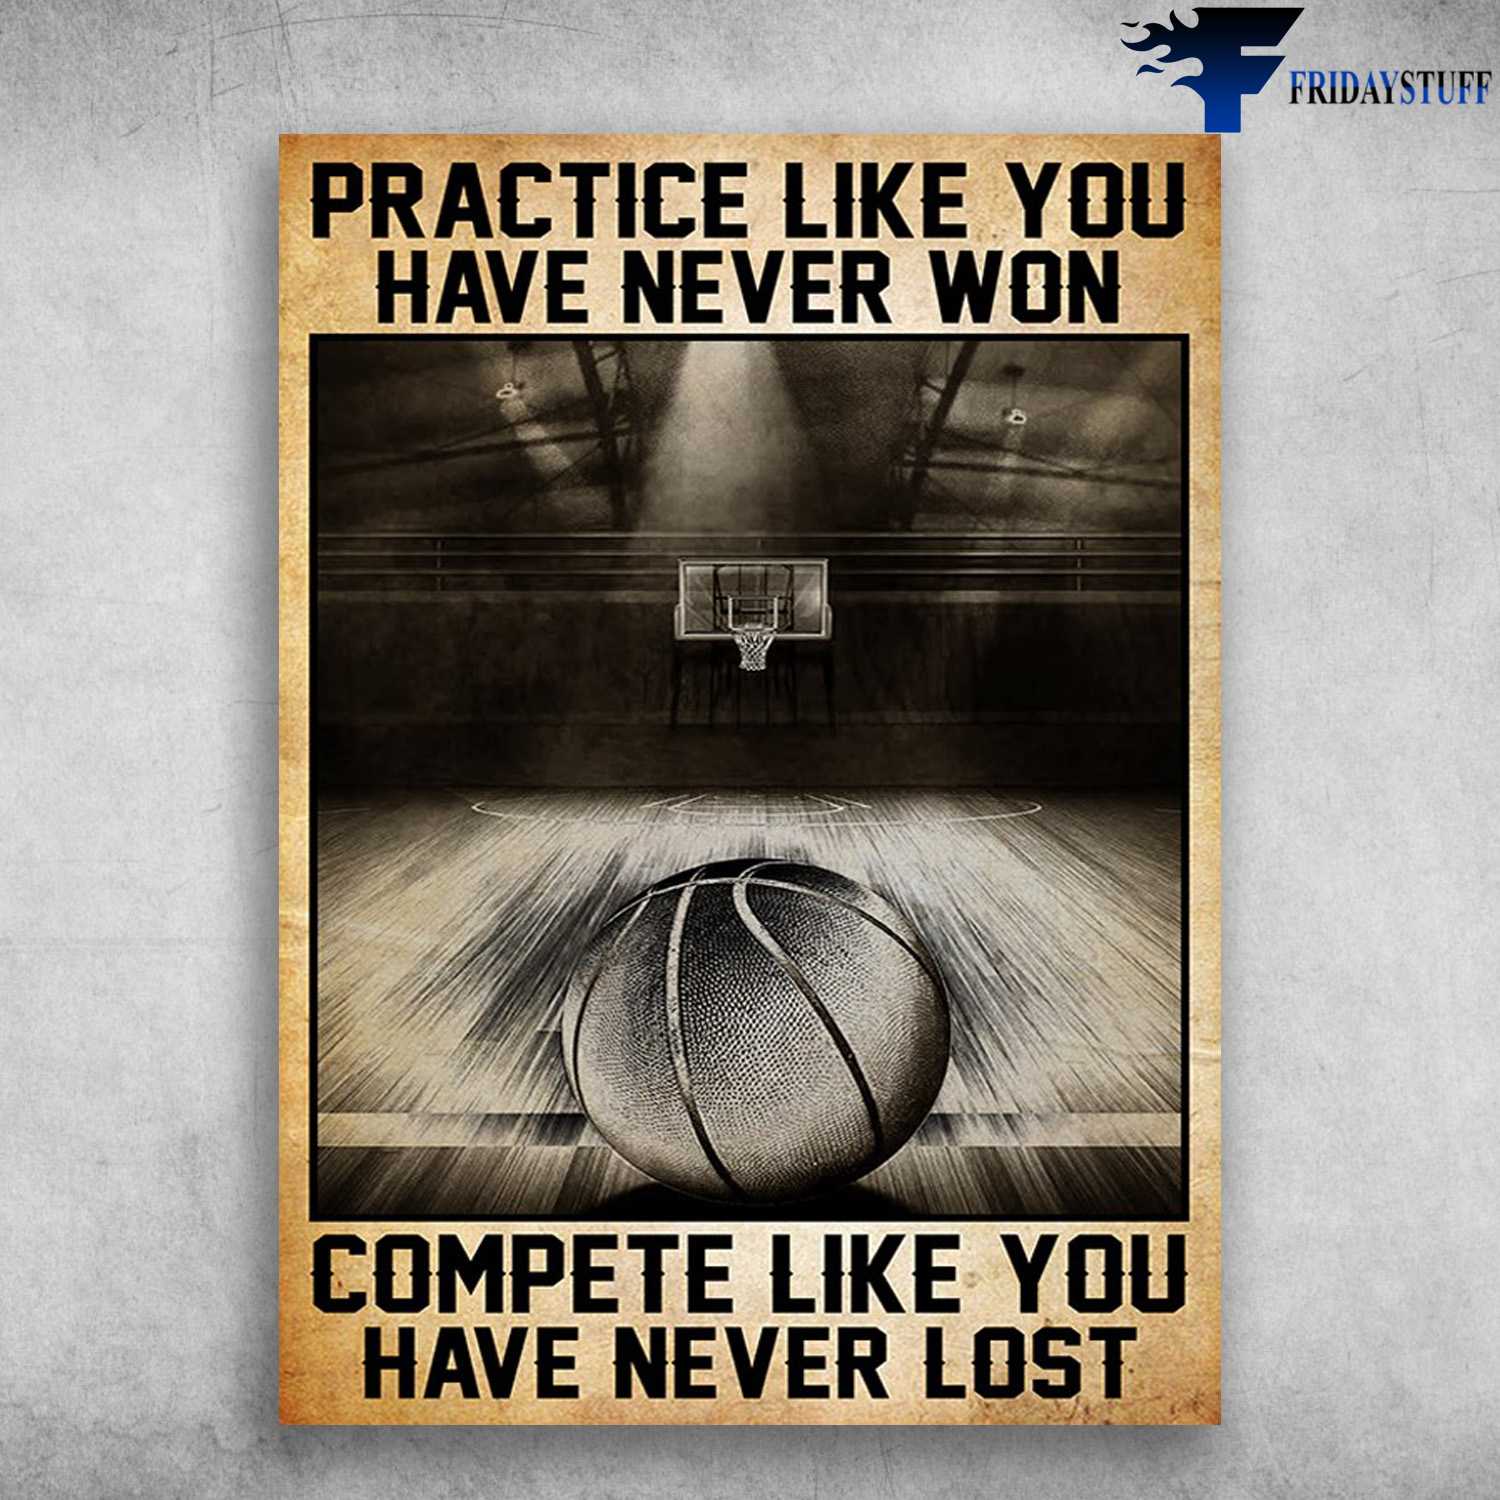 Basketball Poster - Practive Like You Have Never Won, Complete Like You Have Never Lost, Basketball Lover